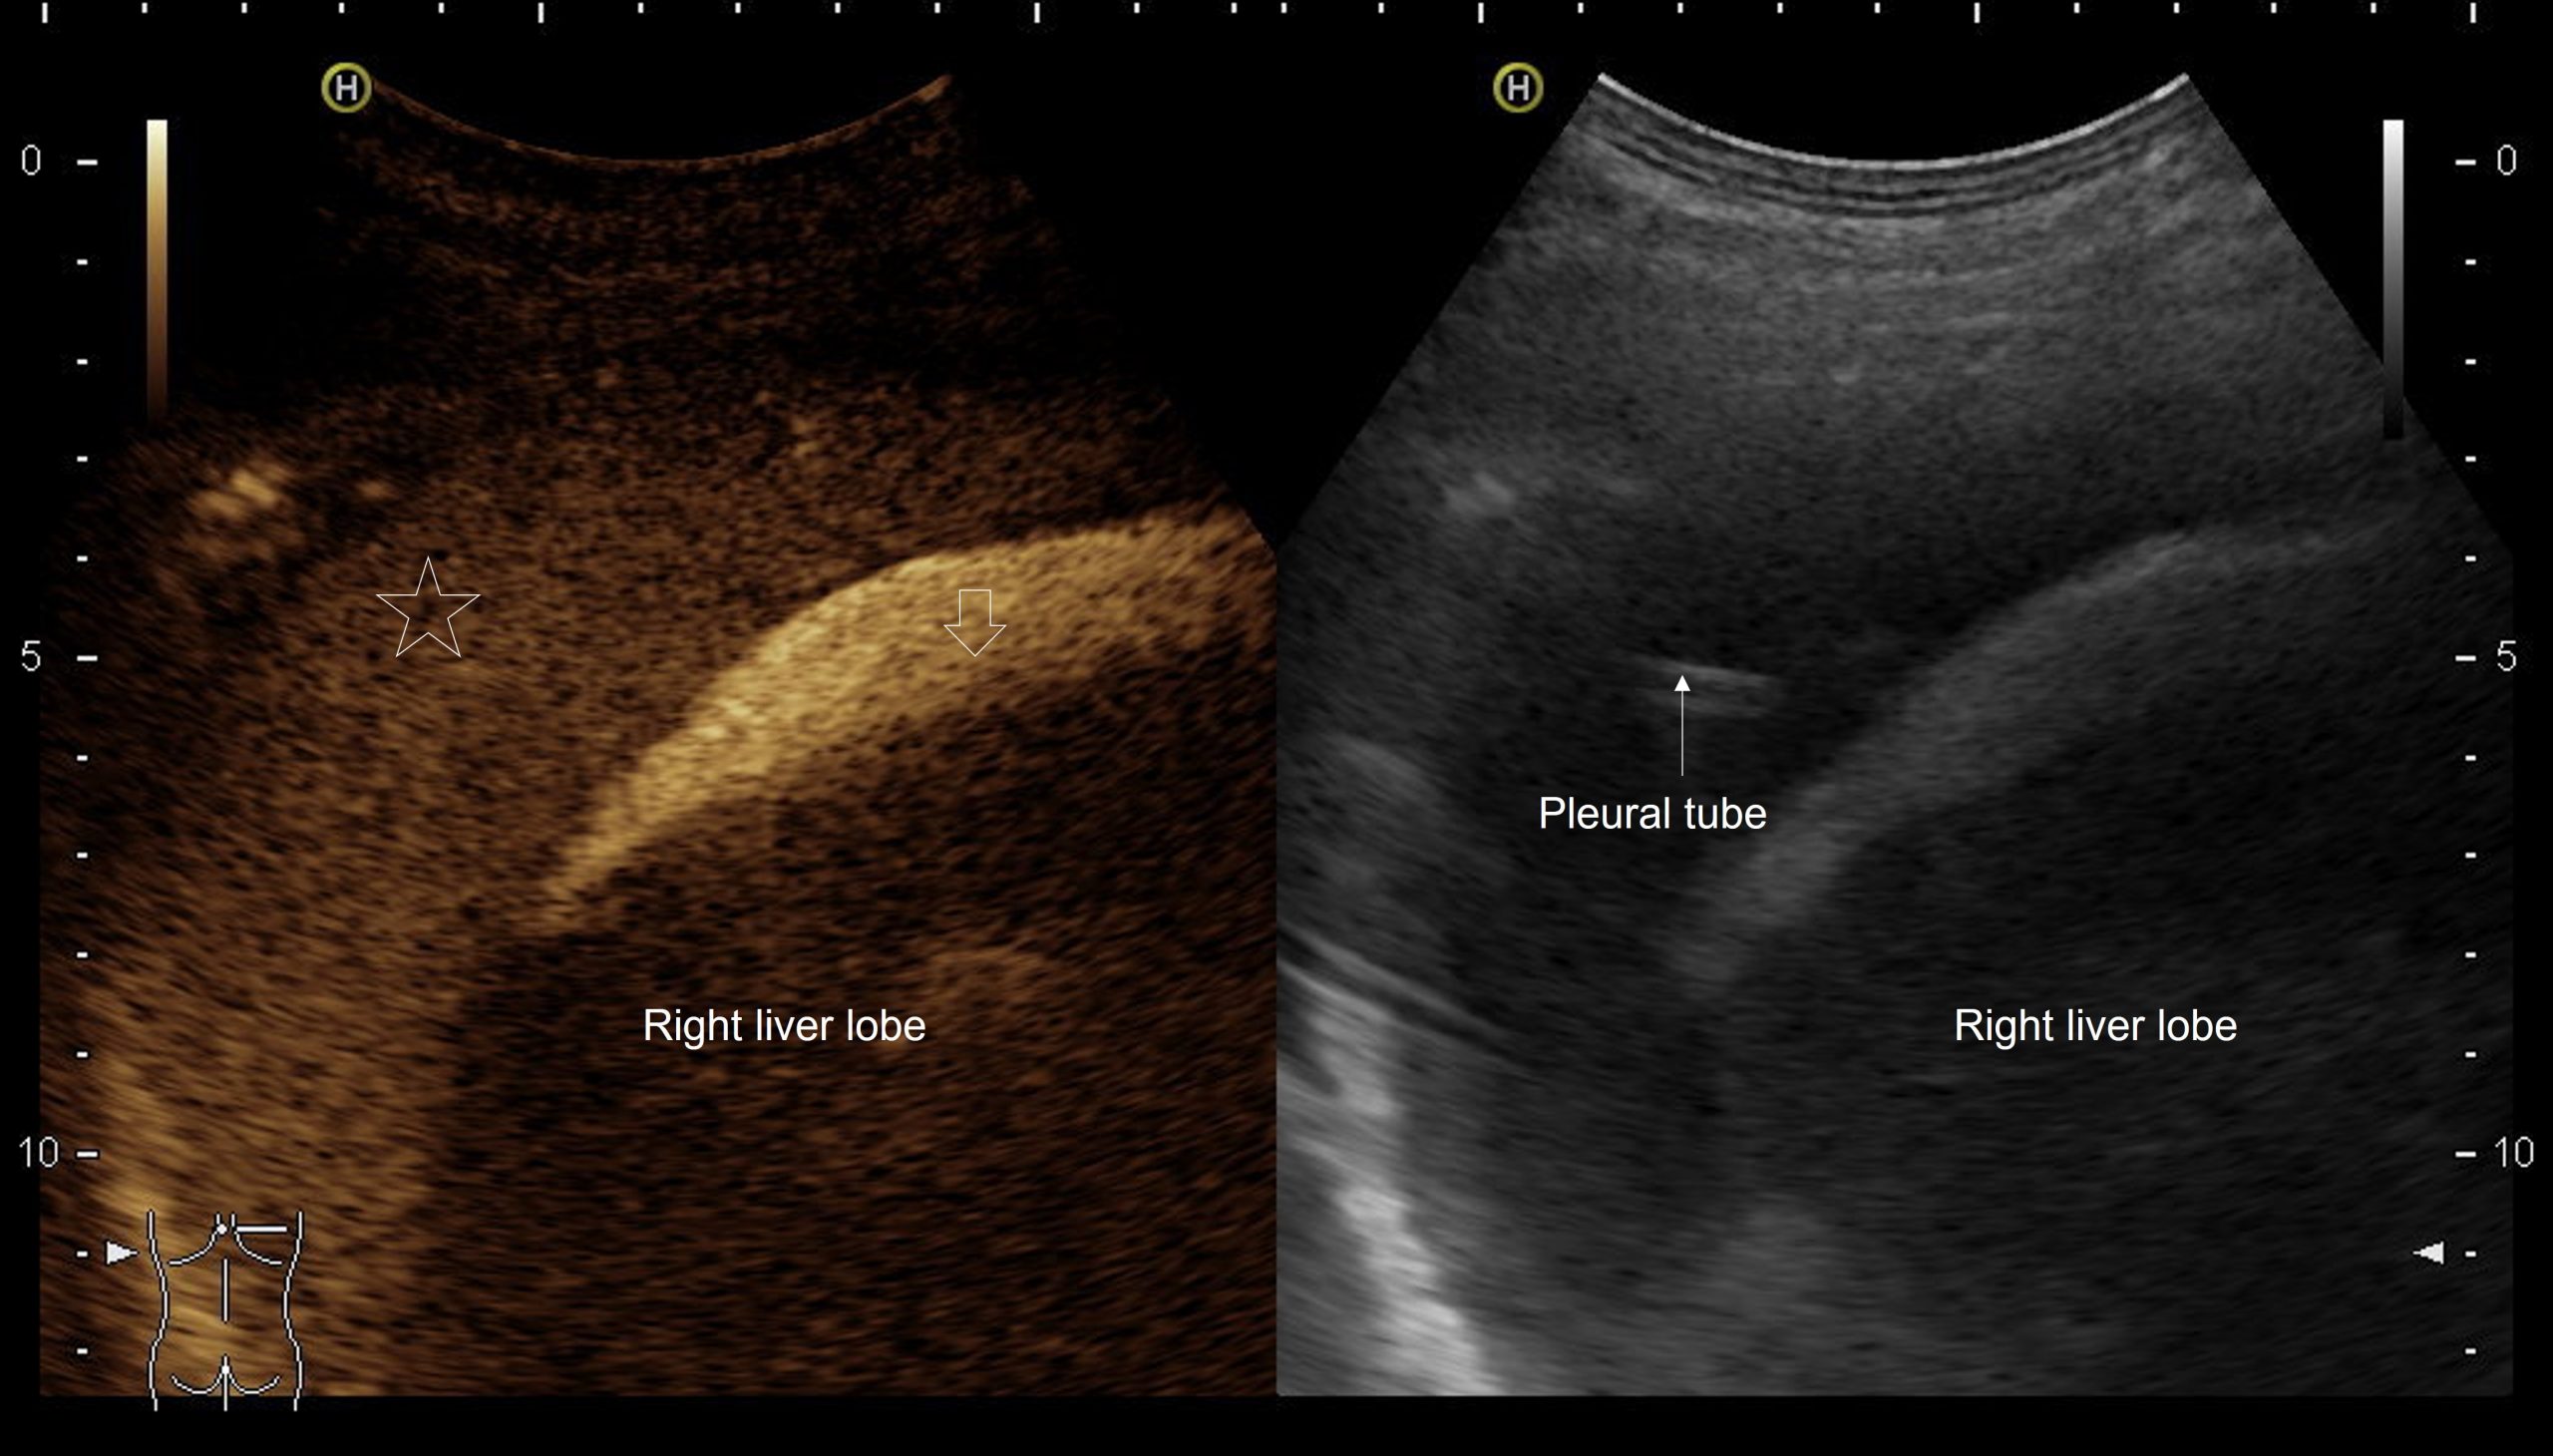 Direct proof of hepatic hydrothorax by intracavitary contrast-enhanced ultrasound </br> [Mar 2022]